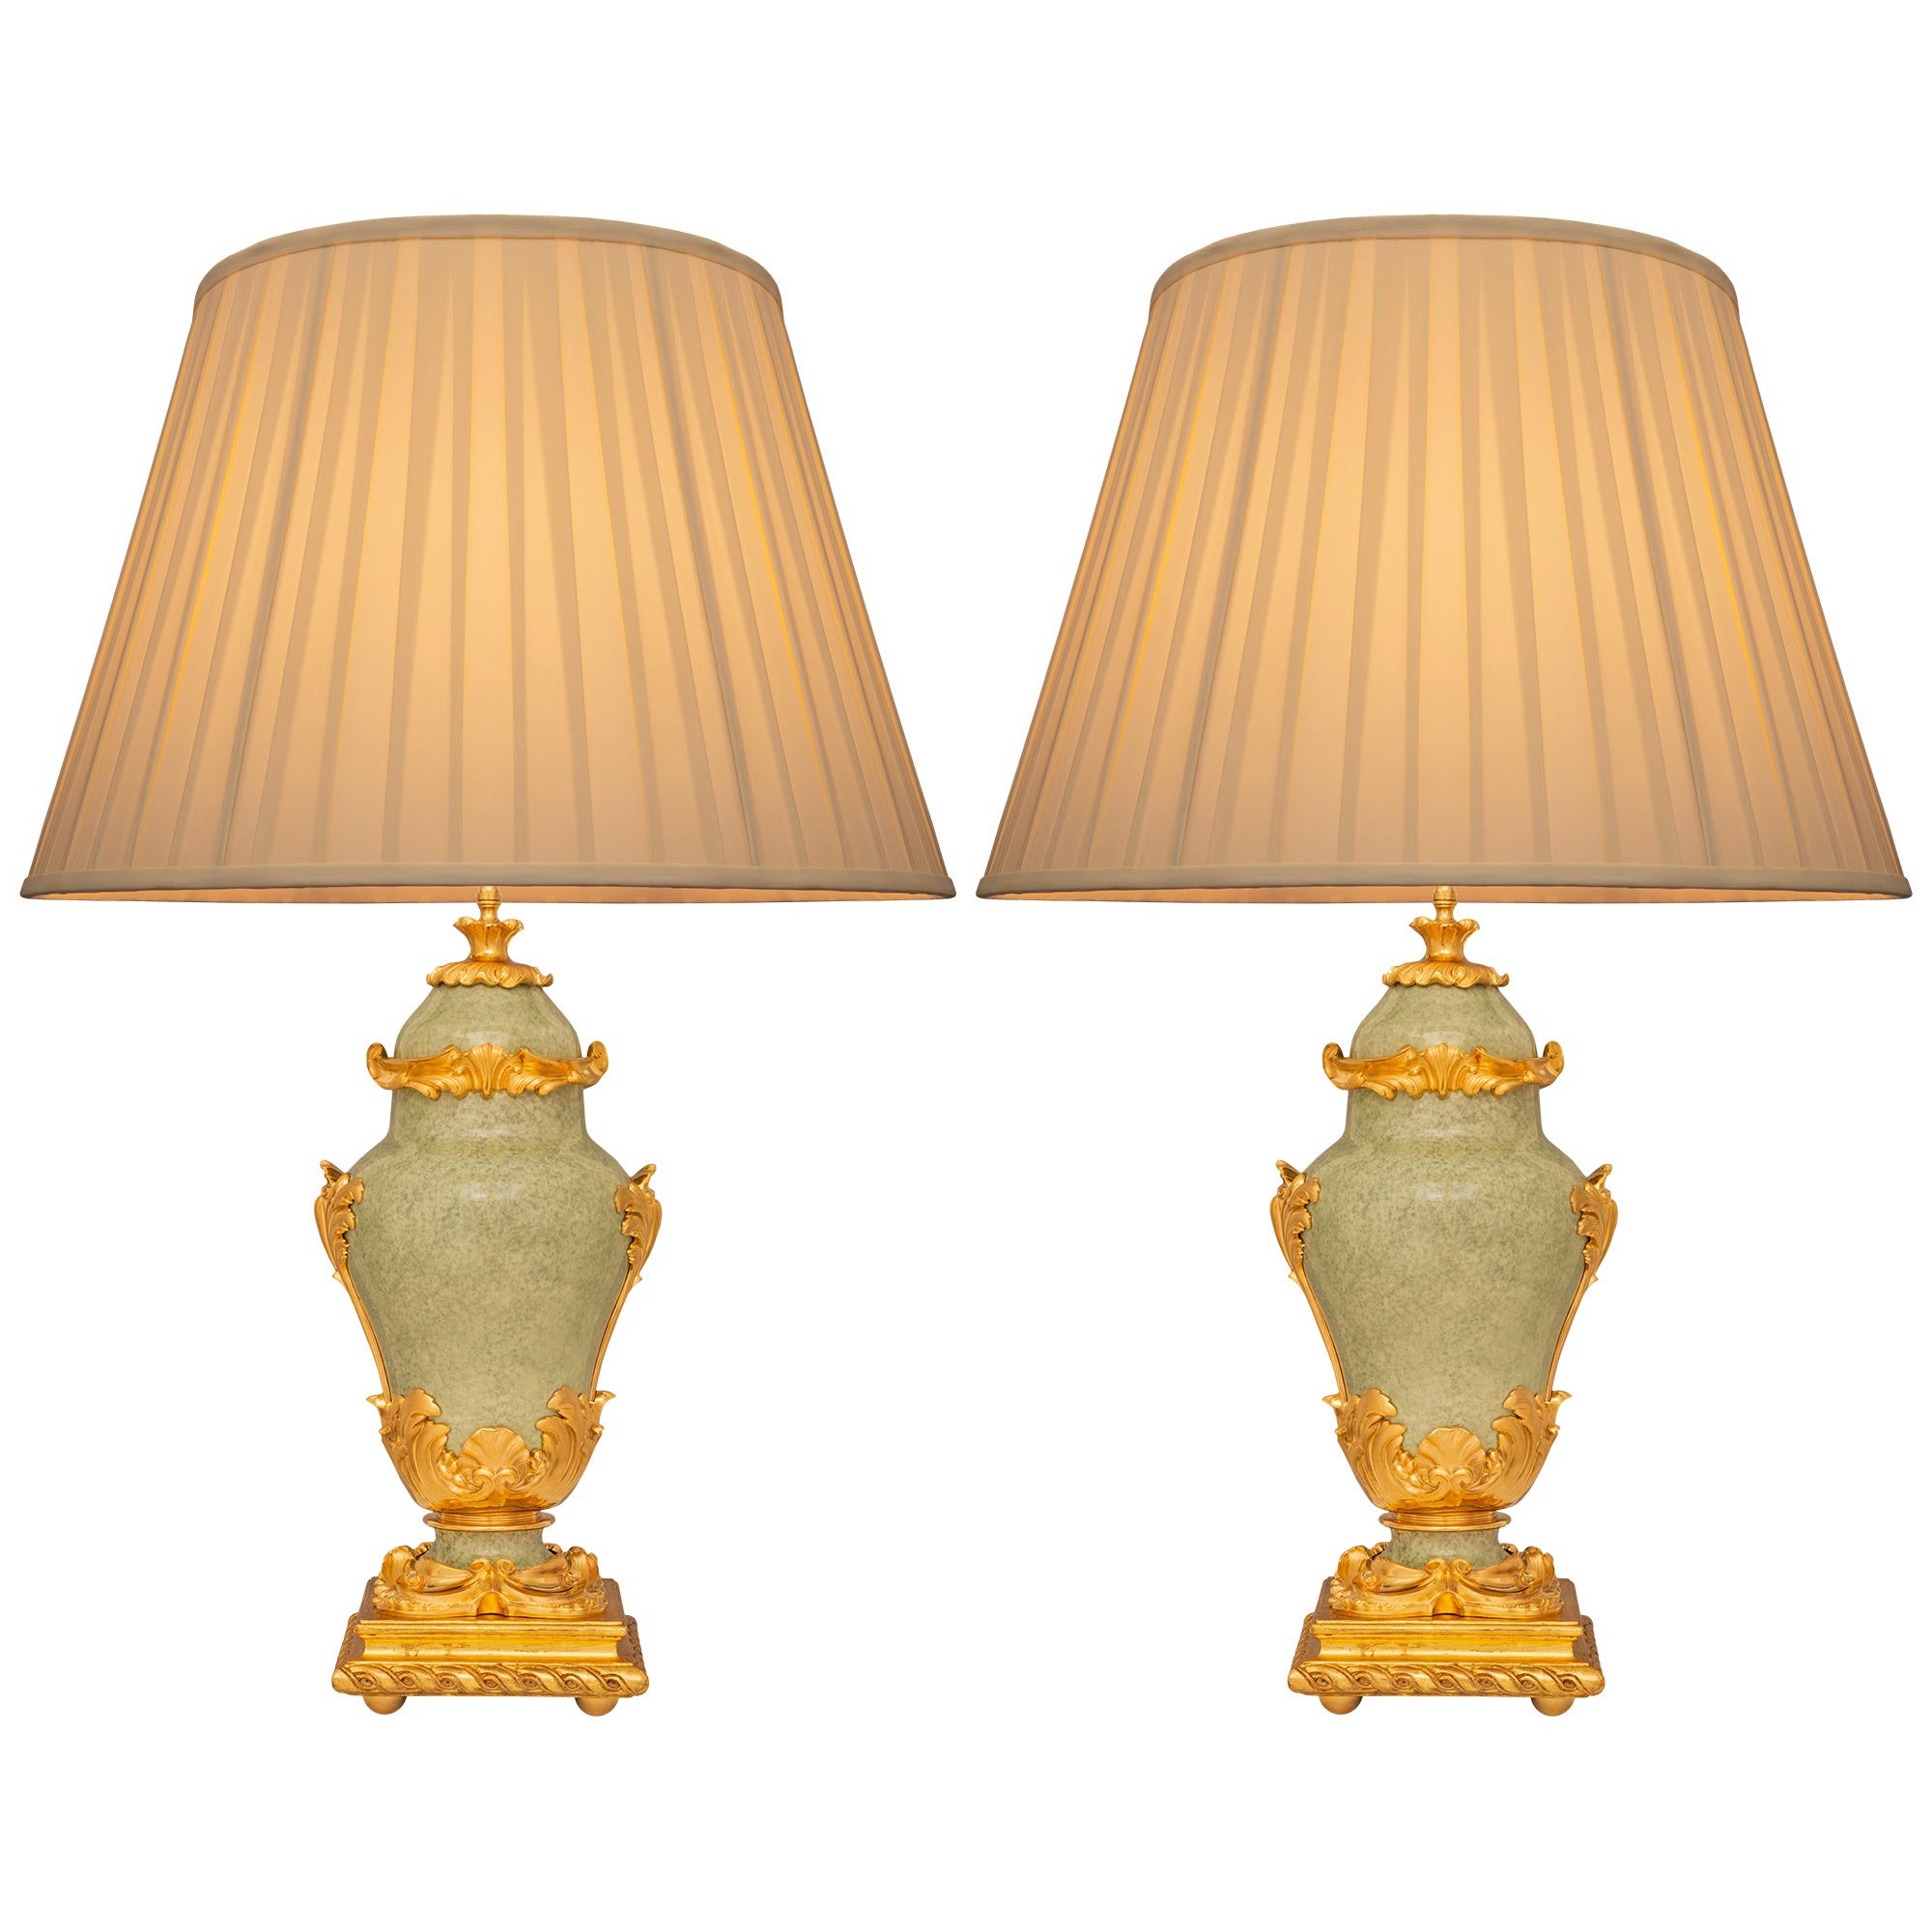 Pair Of French 19th c. Louis XV St. Light Green Fire Glazed Porcelain Lamps For Sale